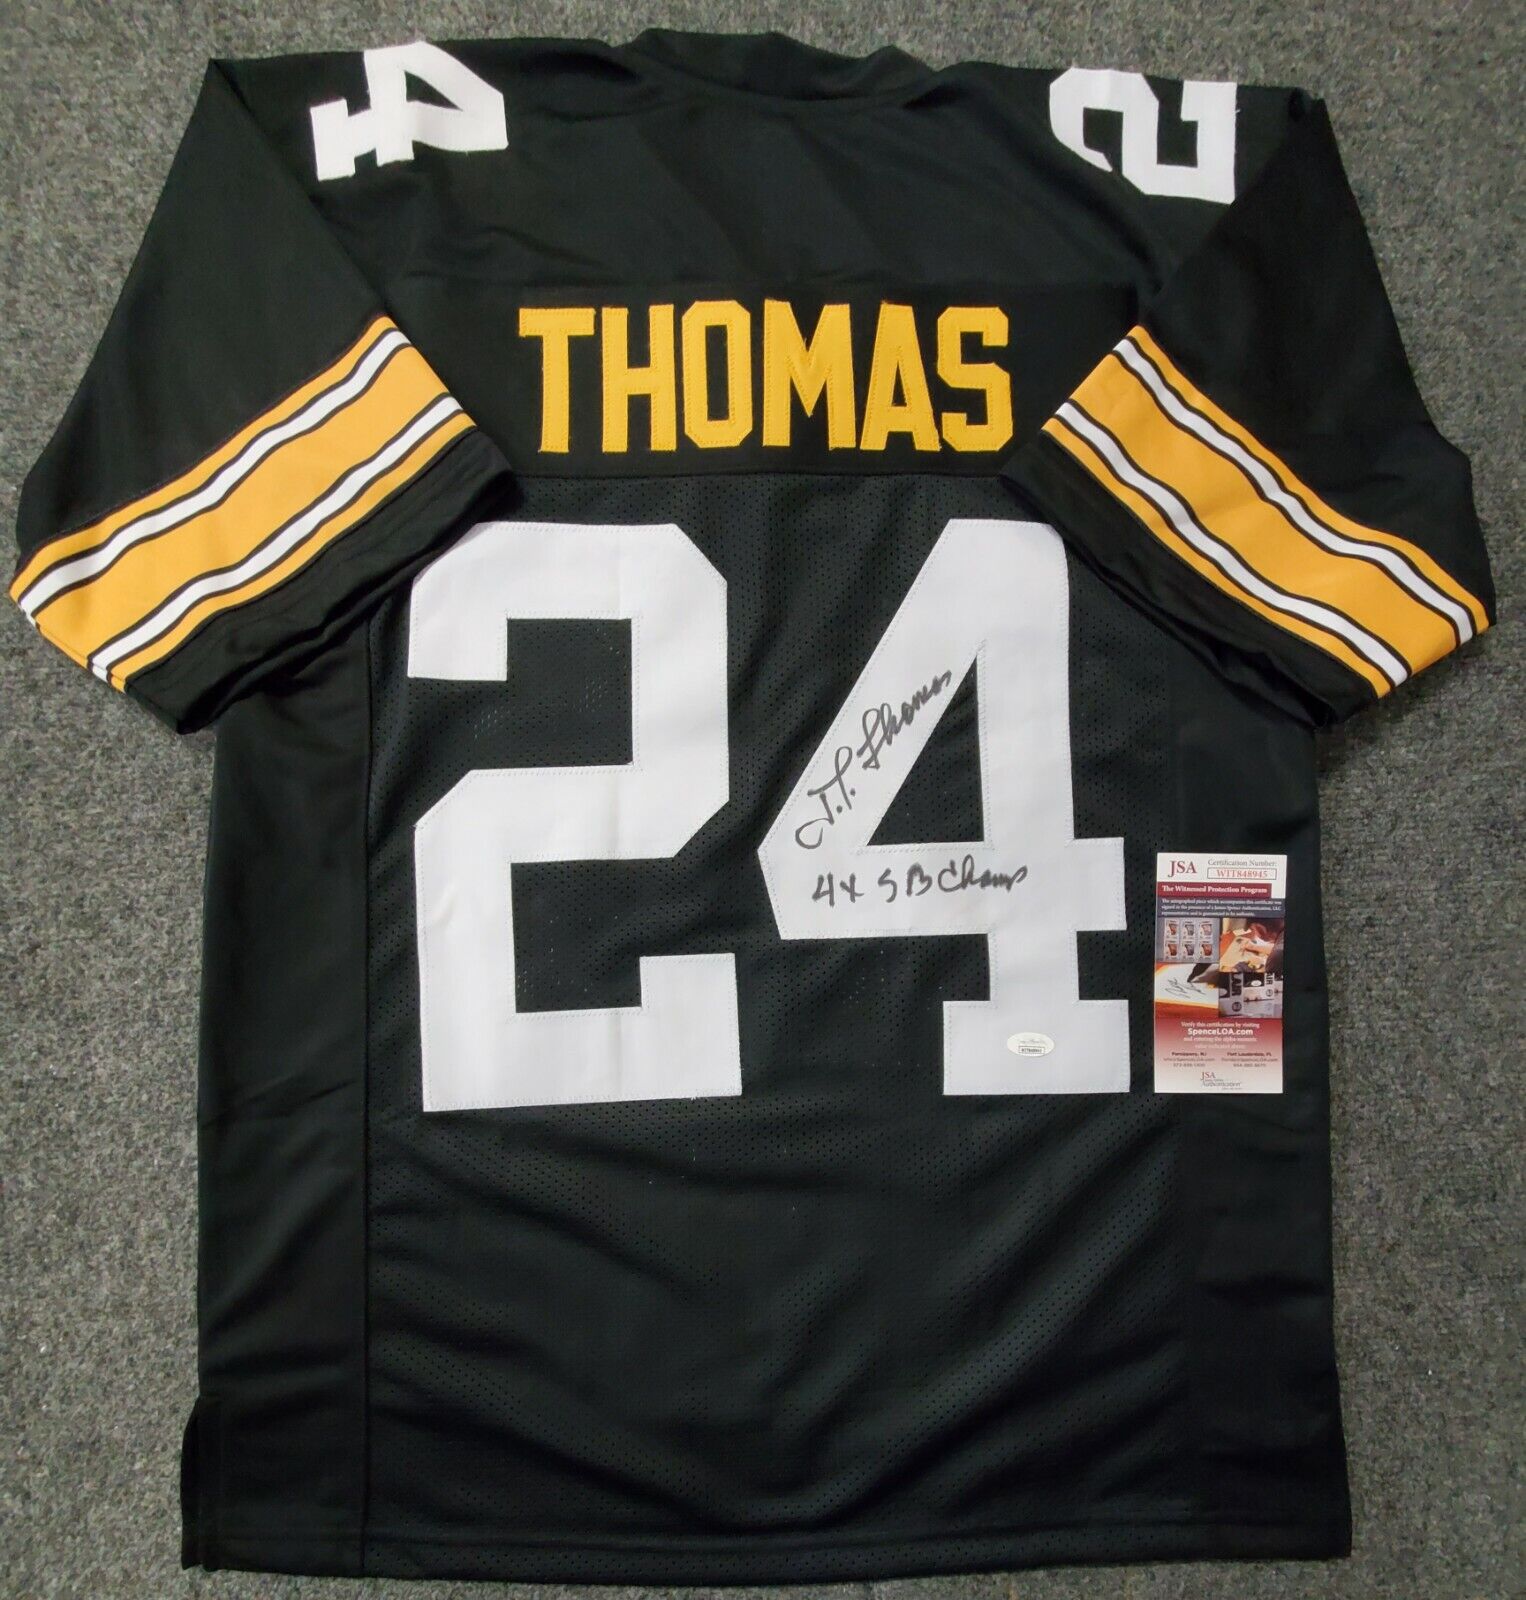 Pittsburgh Steelers Jt Thomas Autographed Inscribed Jersey Jsa Coa